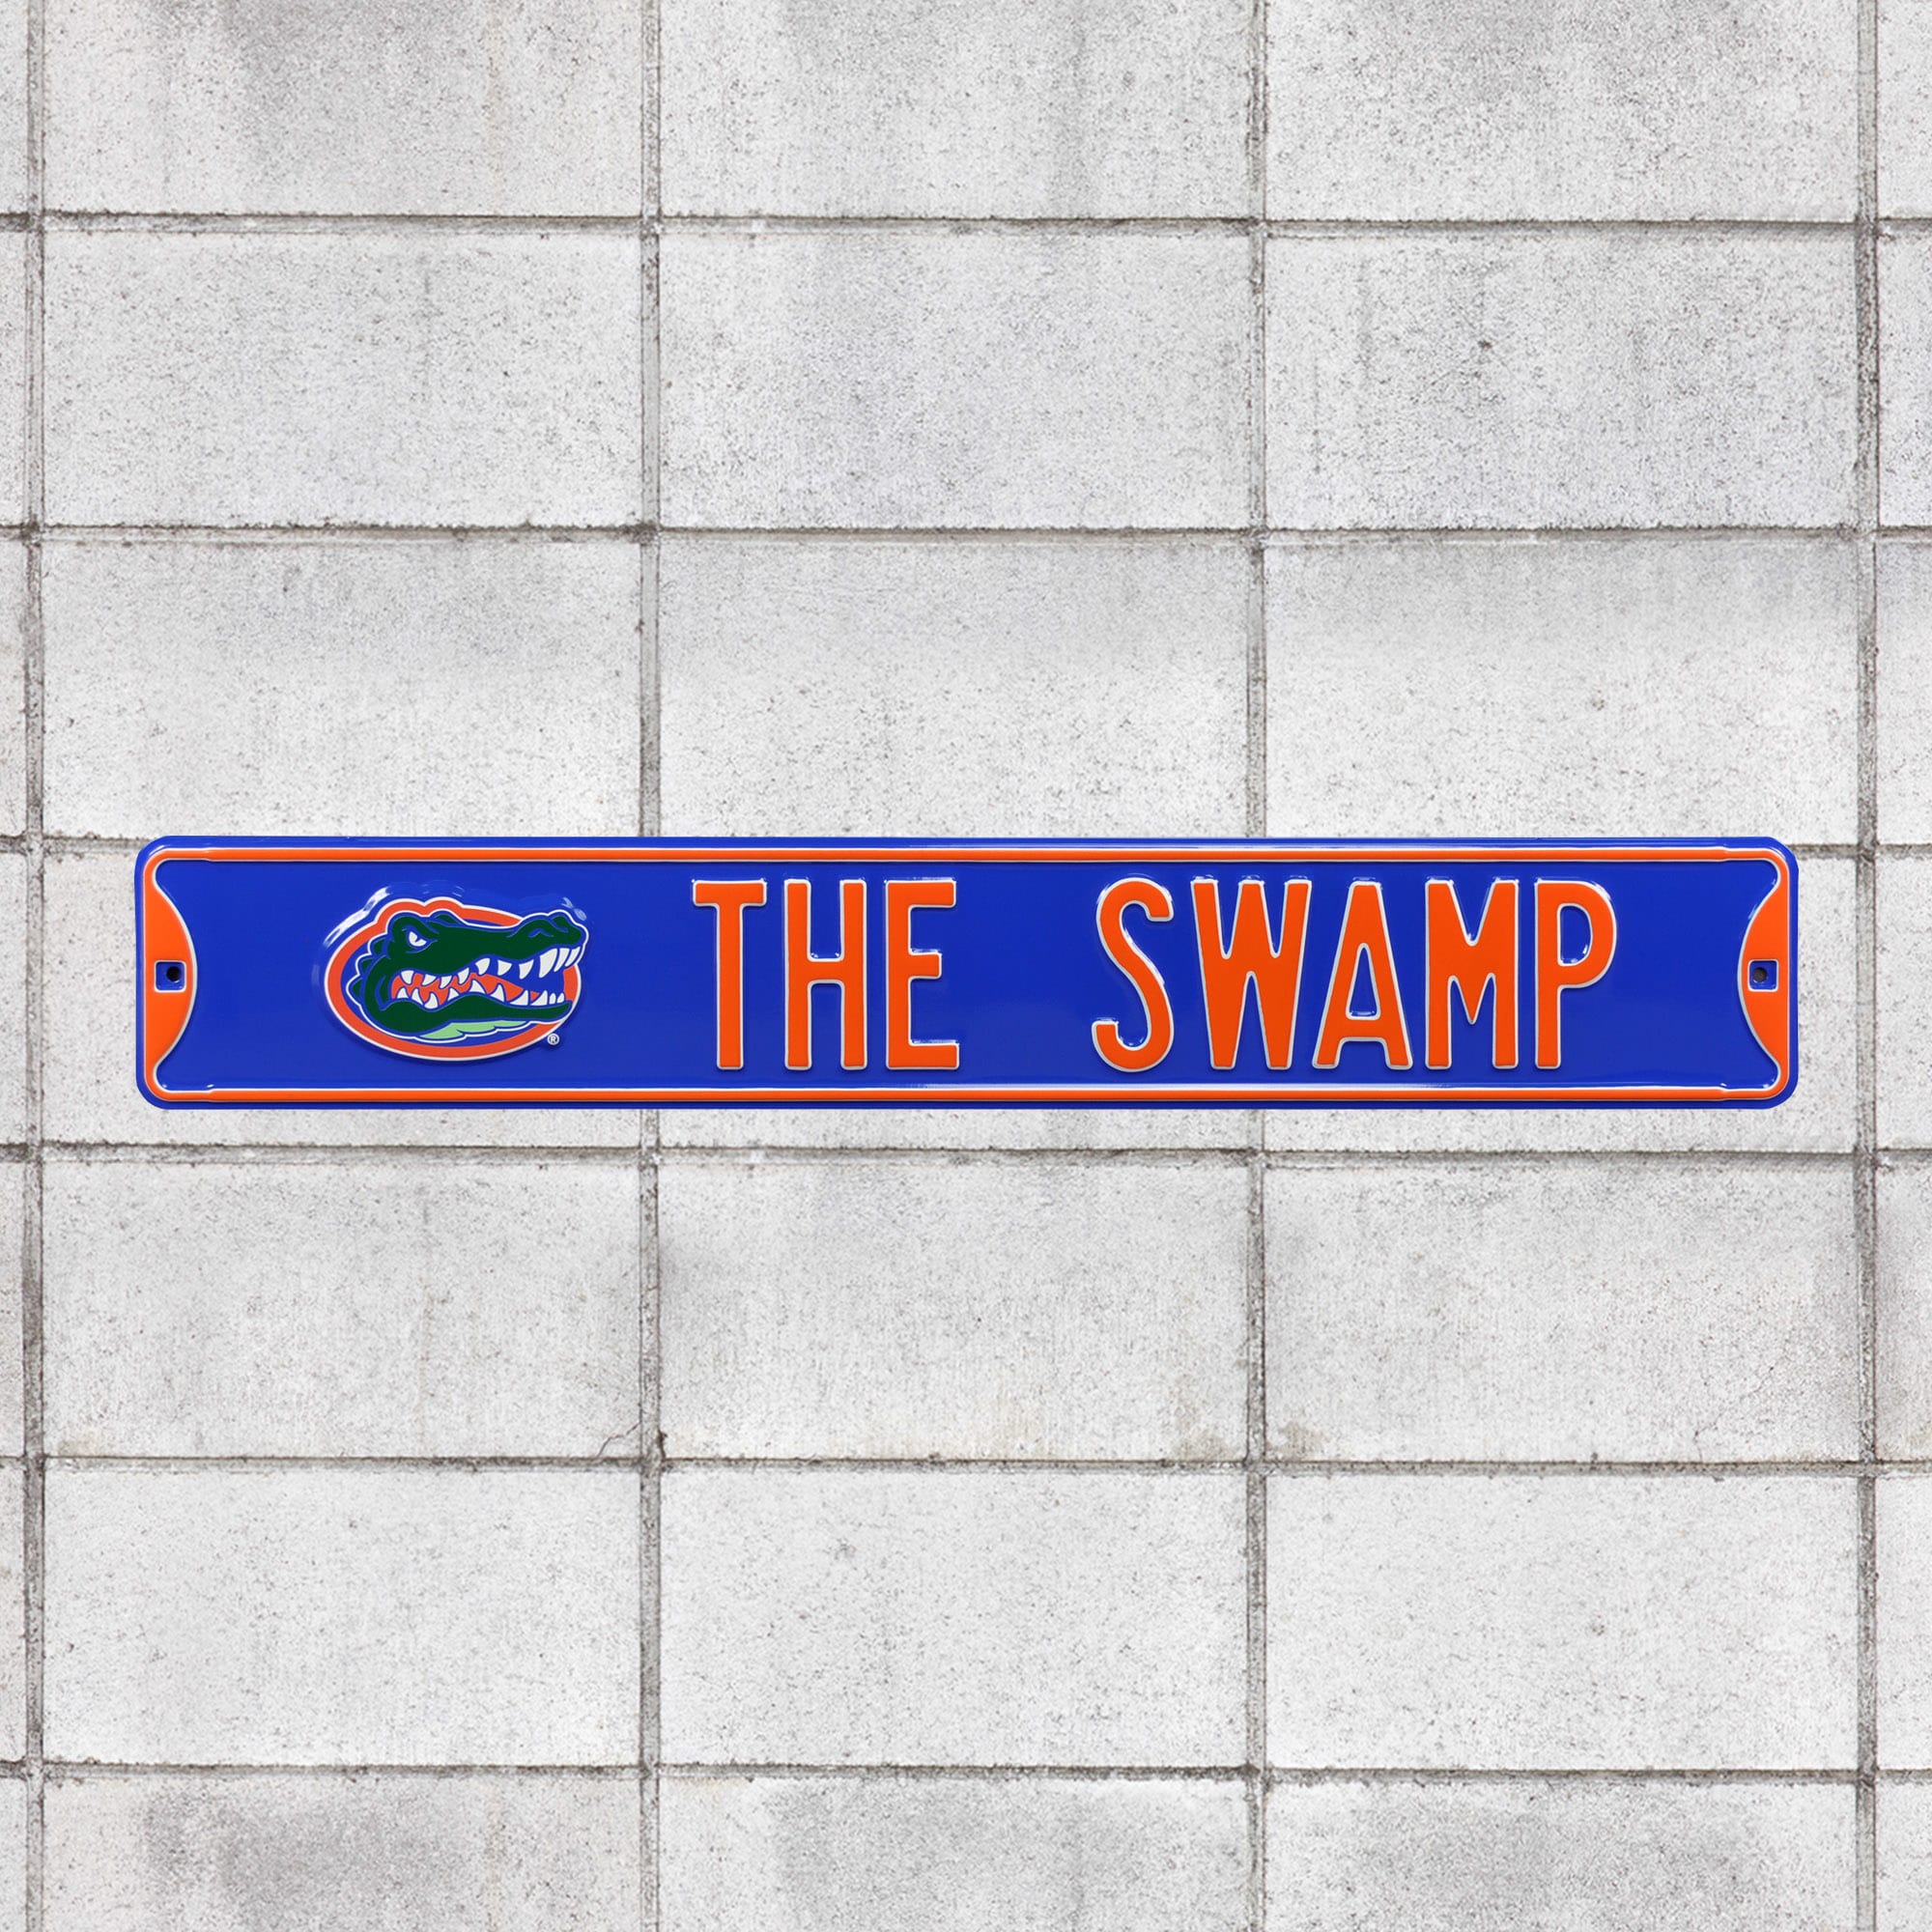 Florida Gators: The Swamp - Officially Licensed Metal Street Sign 36.0"W x 6.0"H by Fathead | 100% Steel